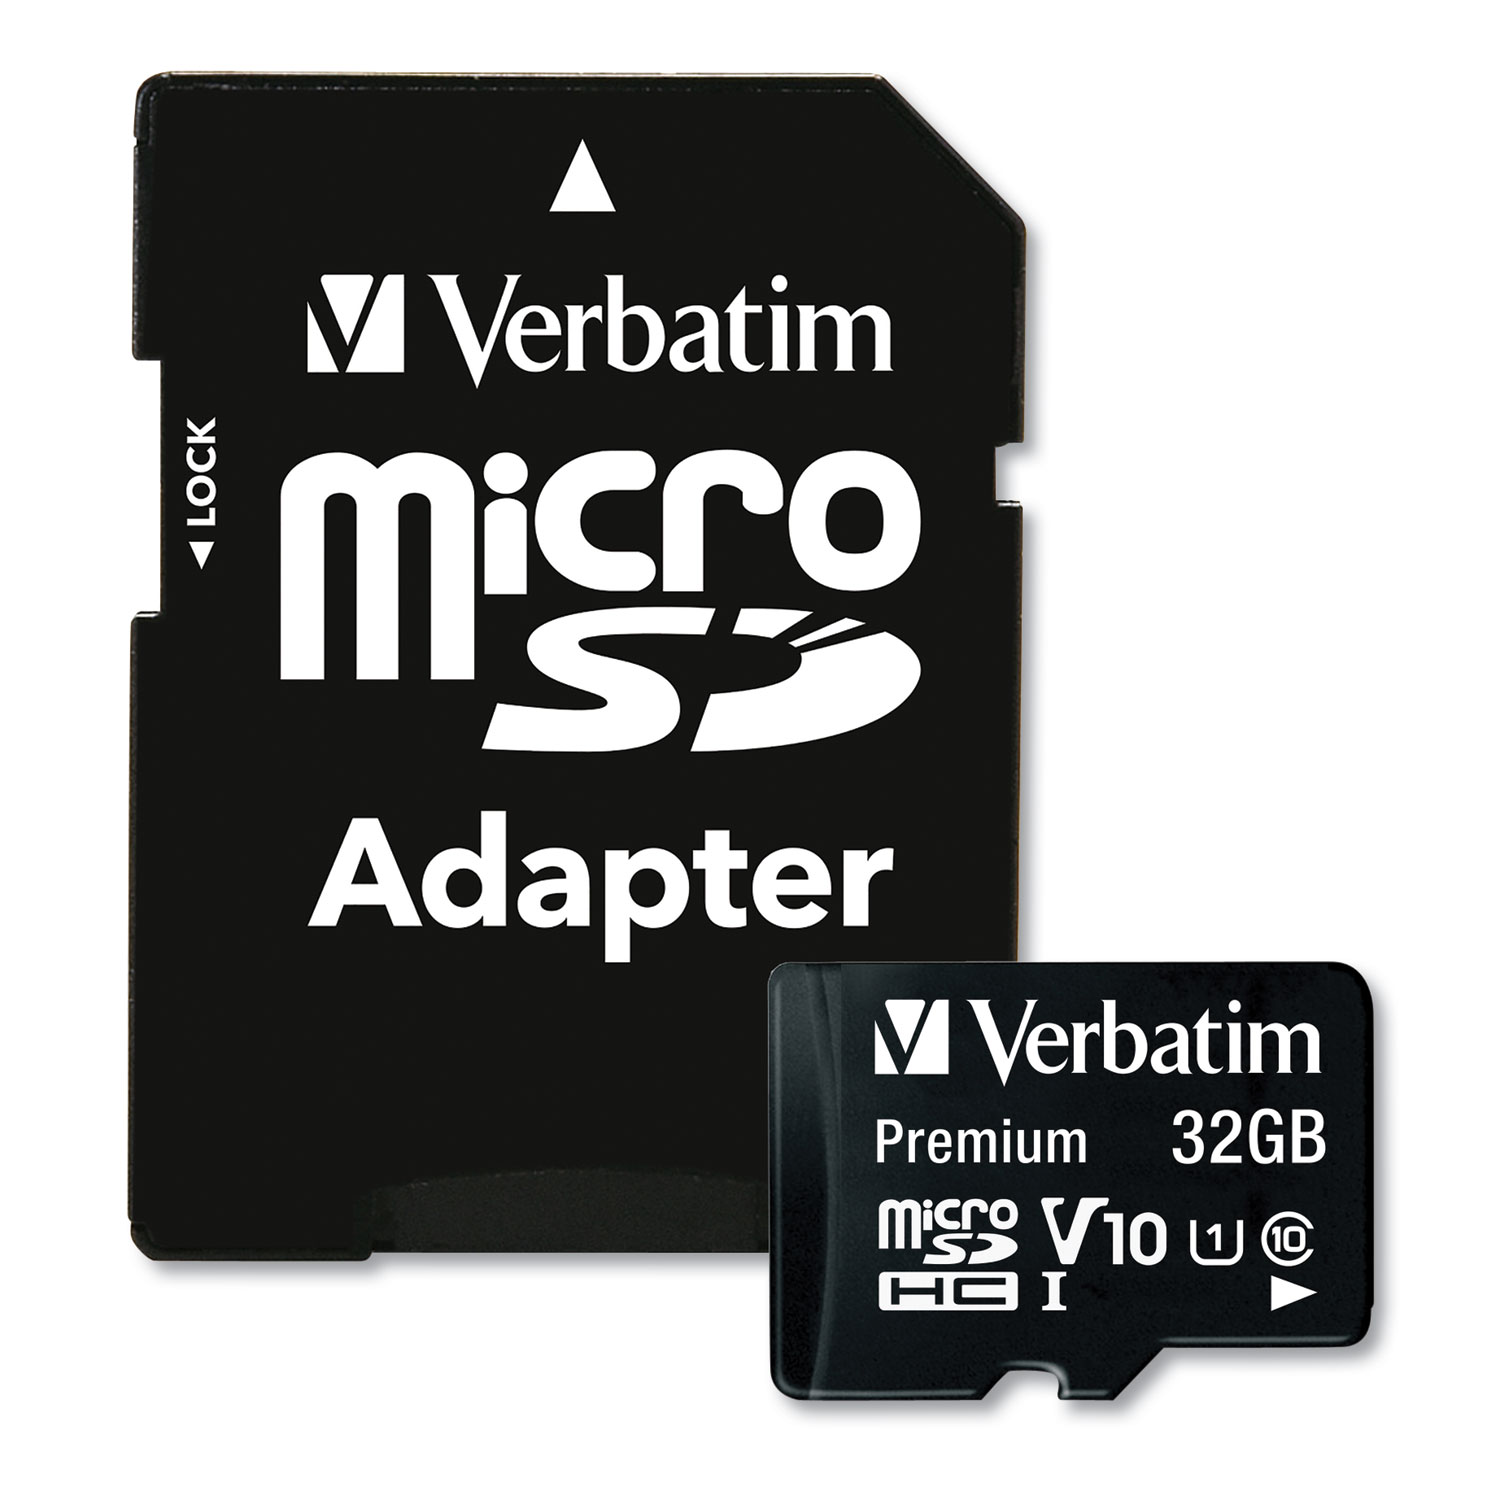 32GB Premium microSDHC Memory Card with Adapter, Up to 90MB/s Read Speed